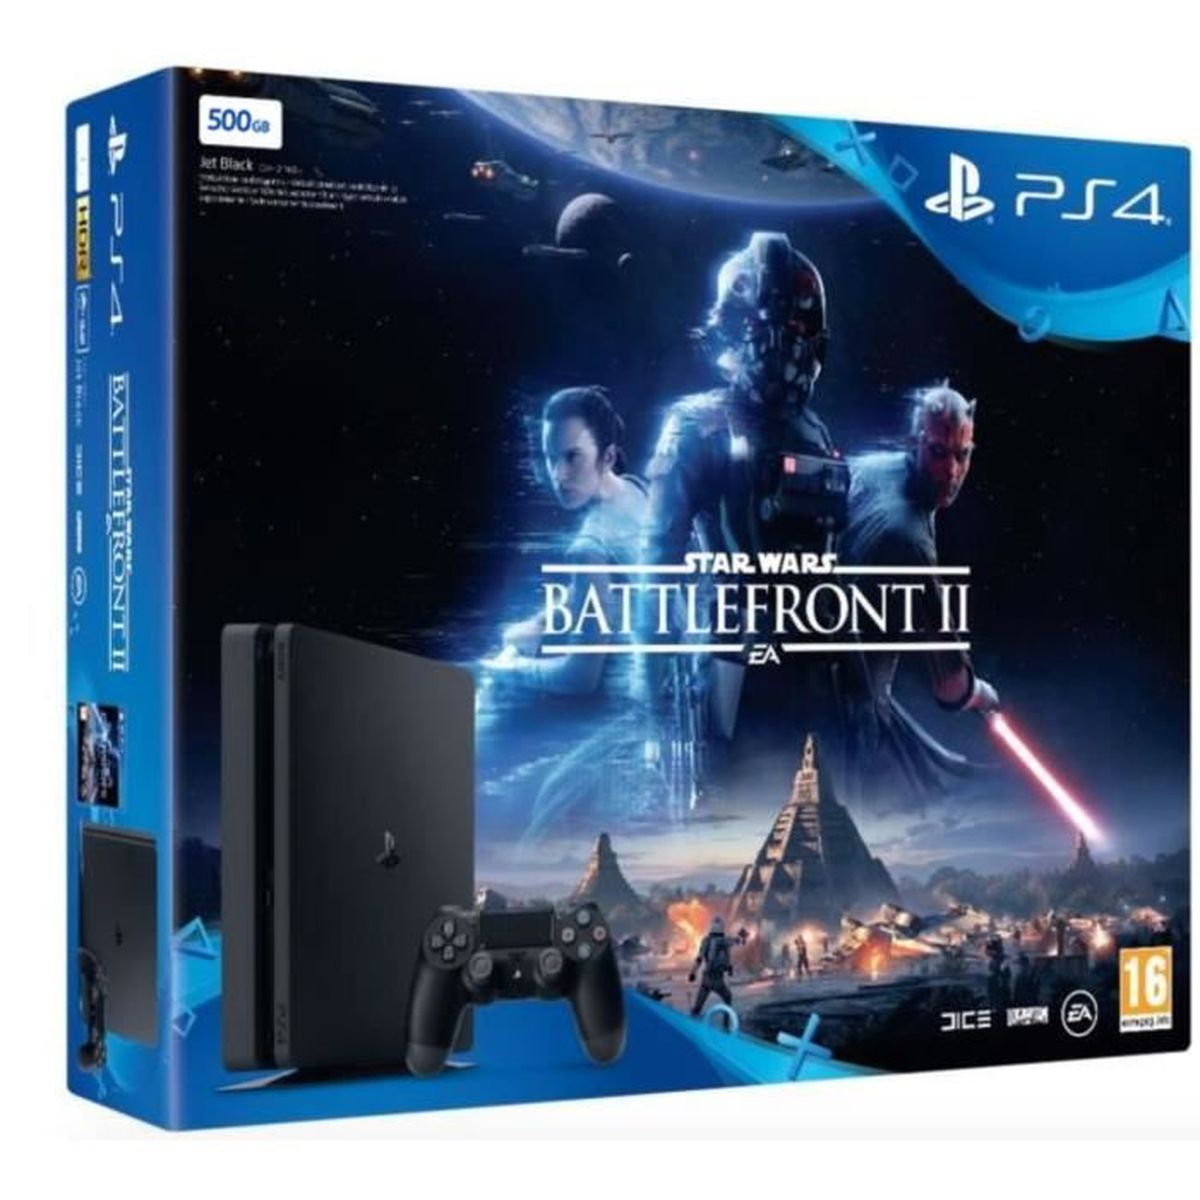 Star wars battlefront classic collection купить. Star Wars Battlefront ps4 диск. Battlefront 2 ps4 диск. Star Wars Battlefront II Sony ps4. PLAYSTATION 4 Battlefront 2 Edition.